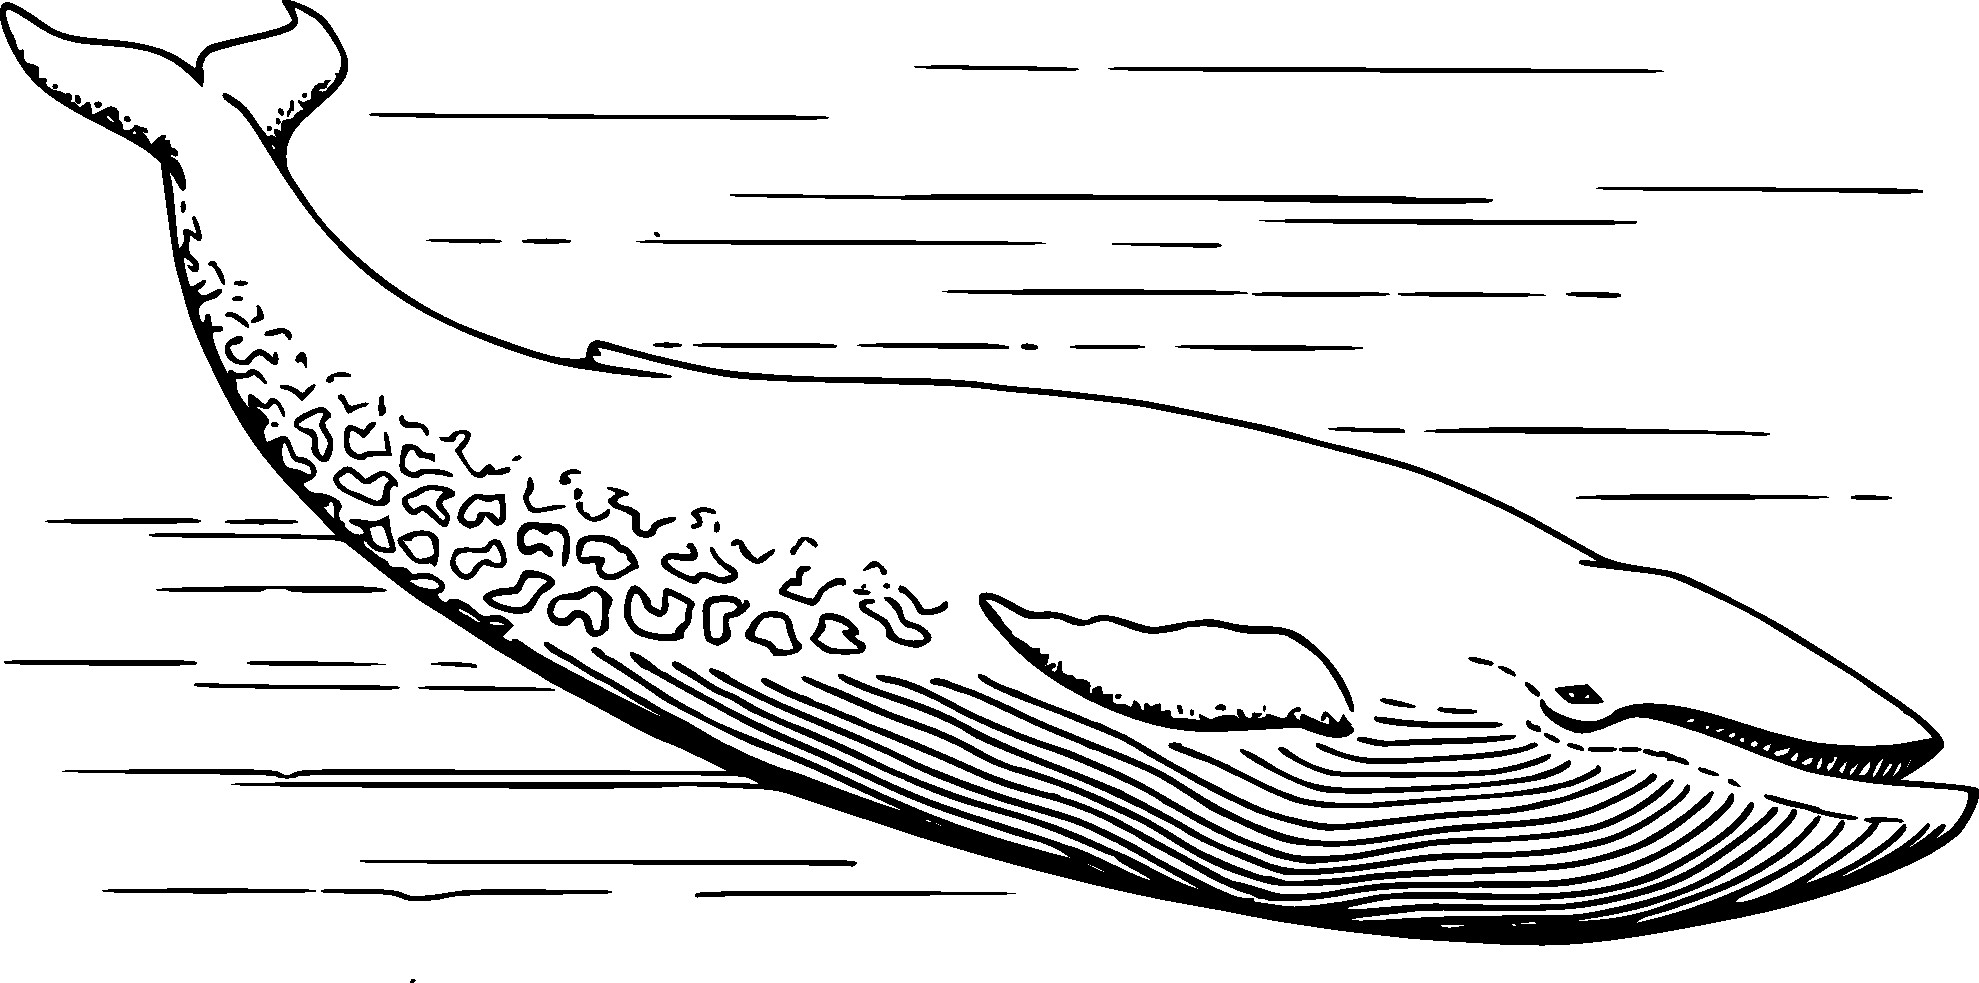 Blue Whale Coloring Pages
 Blue Whale Black White Line Art Coloring Book Colouring